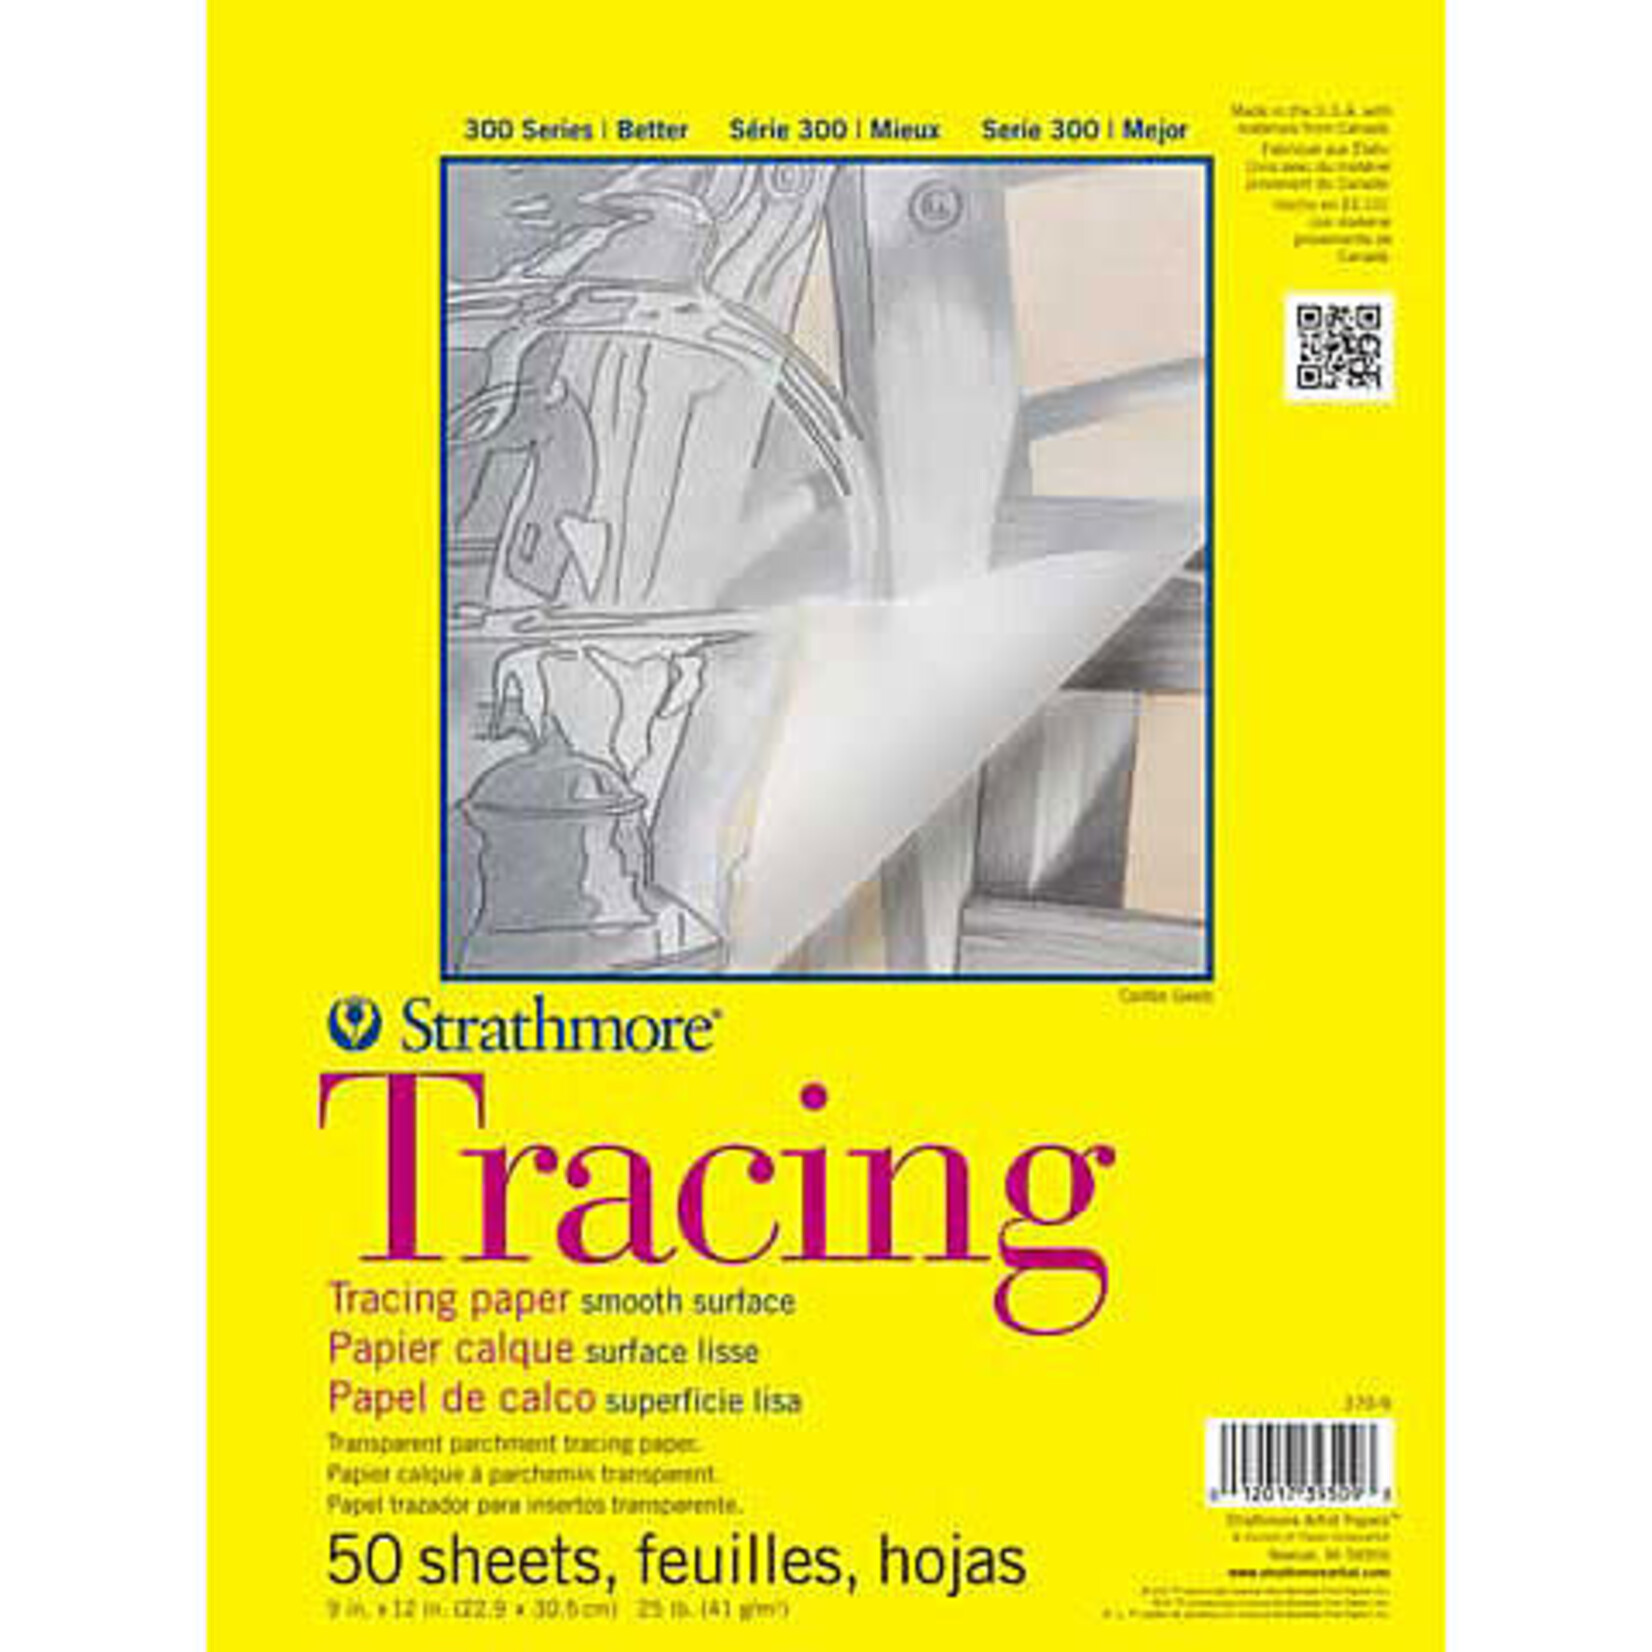 Strathmore Tracing Paper Pads 300 Series, 11'' X 14'' - 50/Sht. 25 Lb.